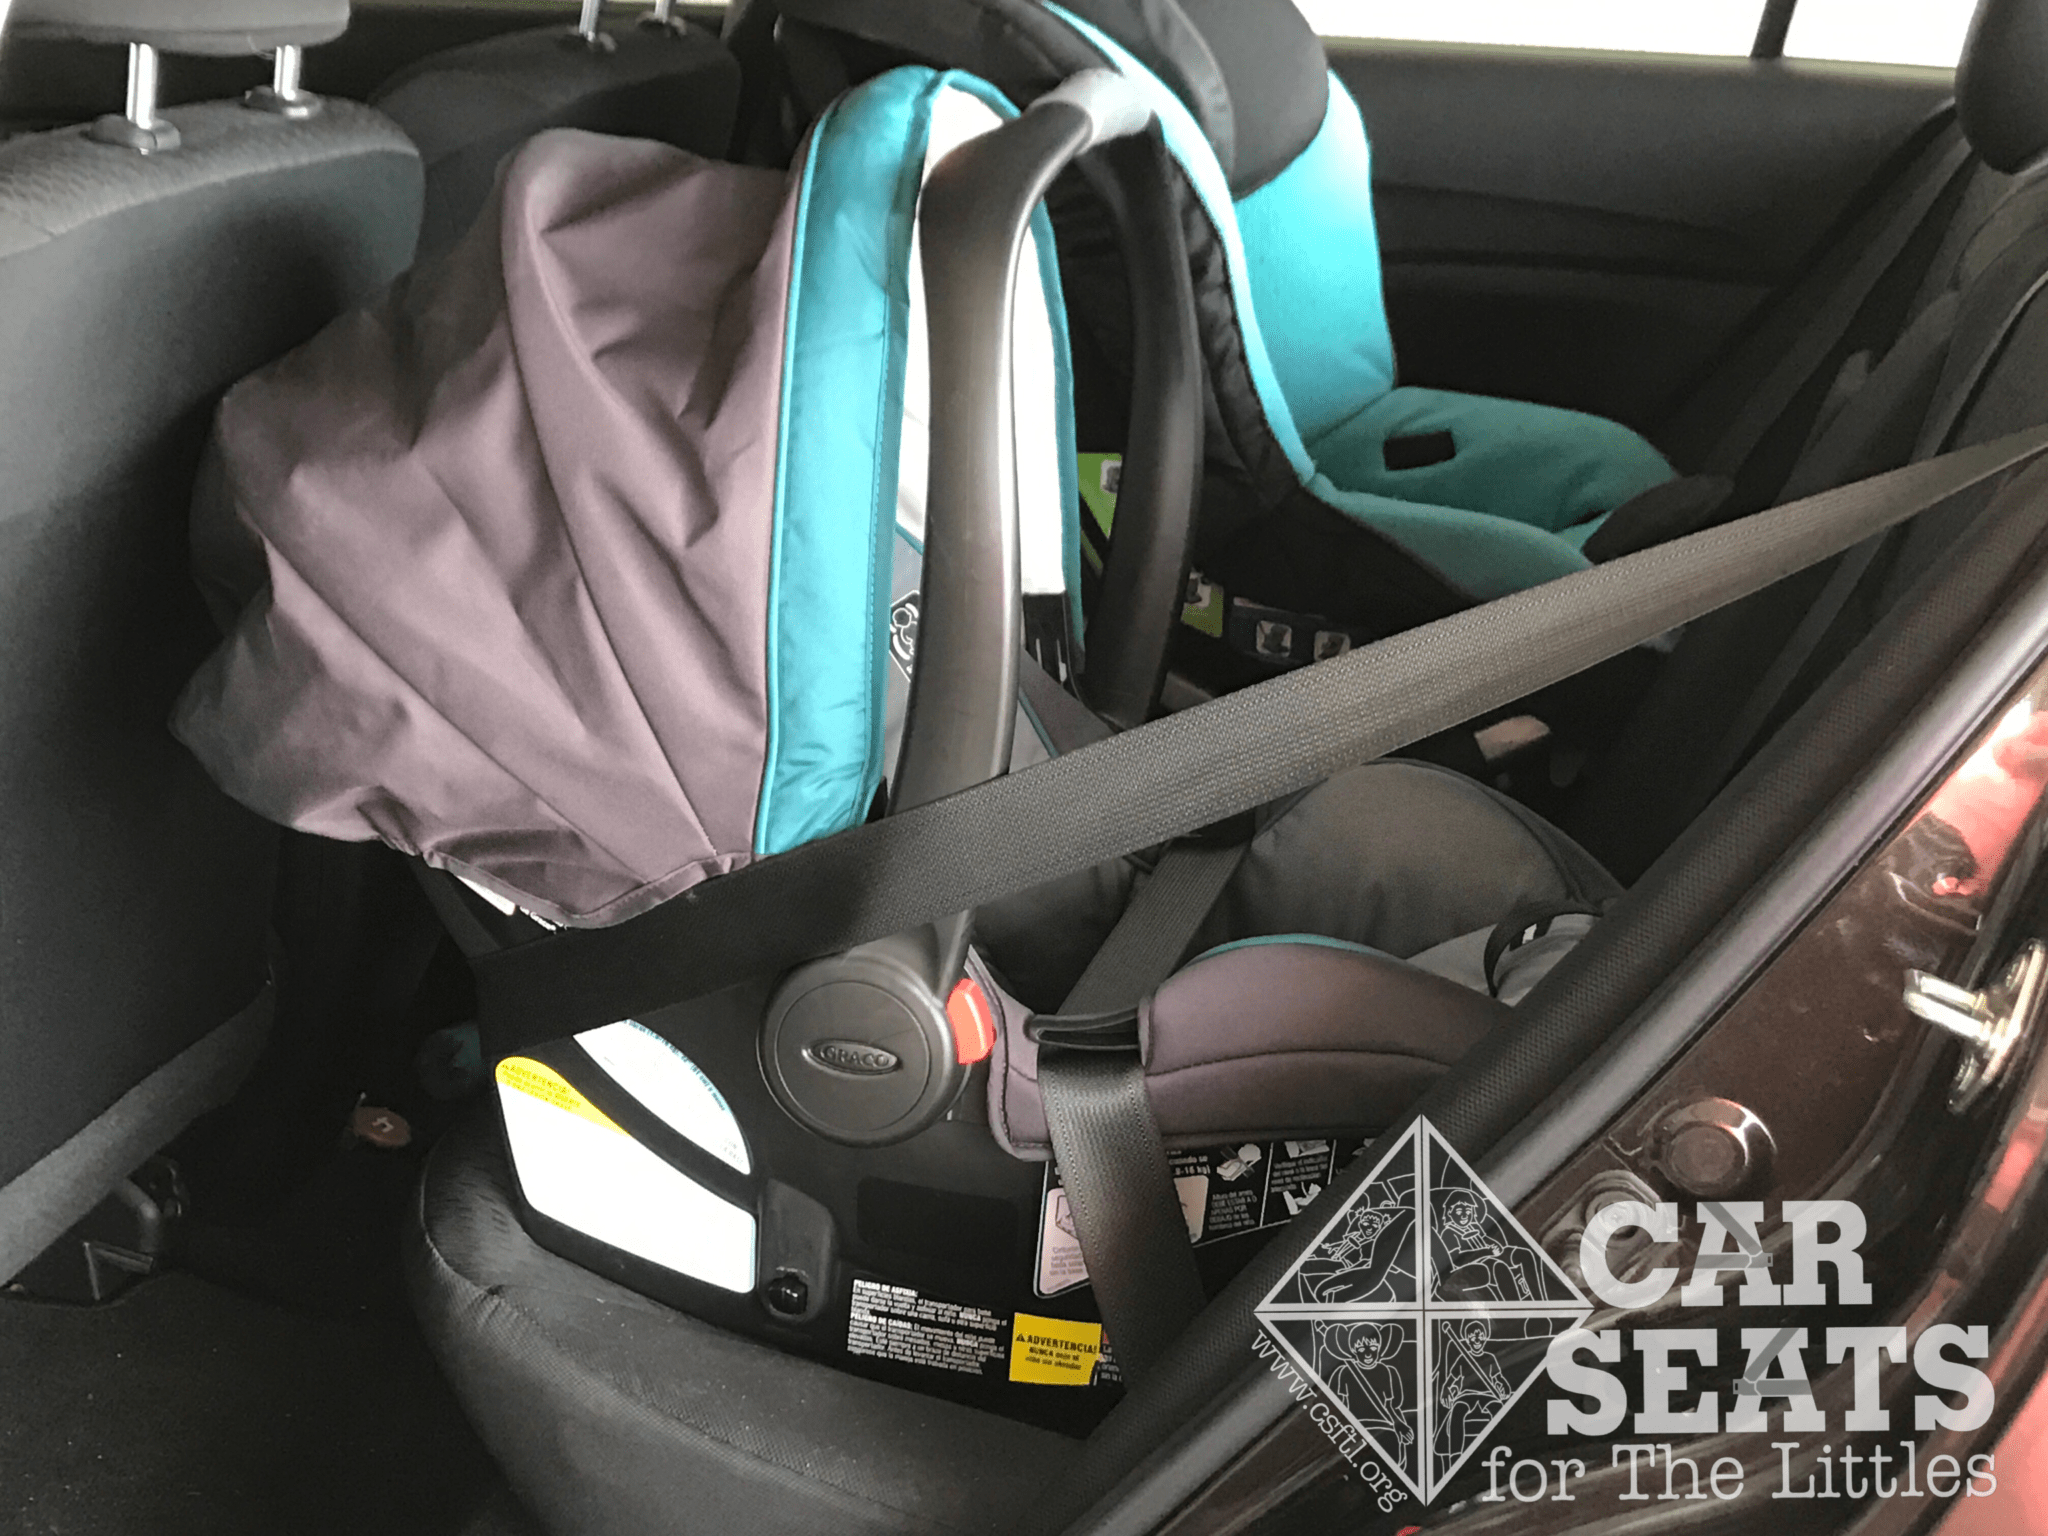 Graco Snugride Snuglock 35 Review Car Seats For The Littles - How To Install Graco Rear Facing Car Seat With Seatbelt